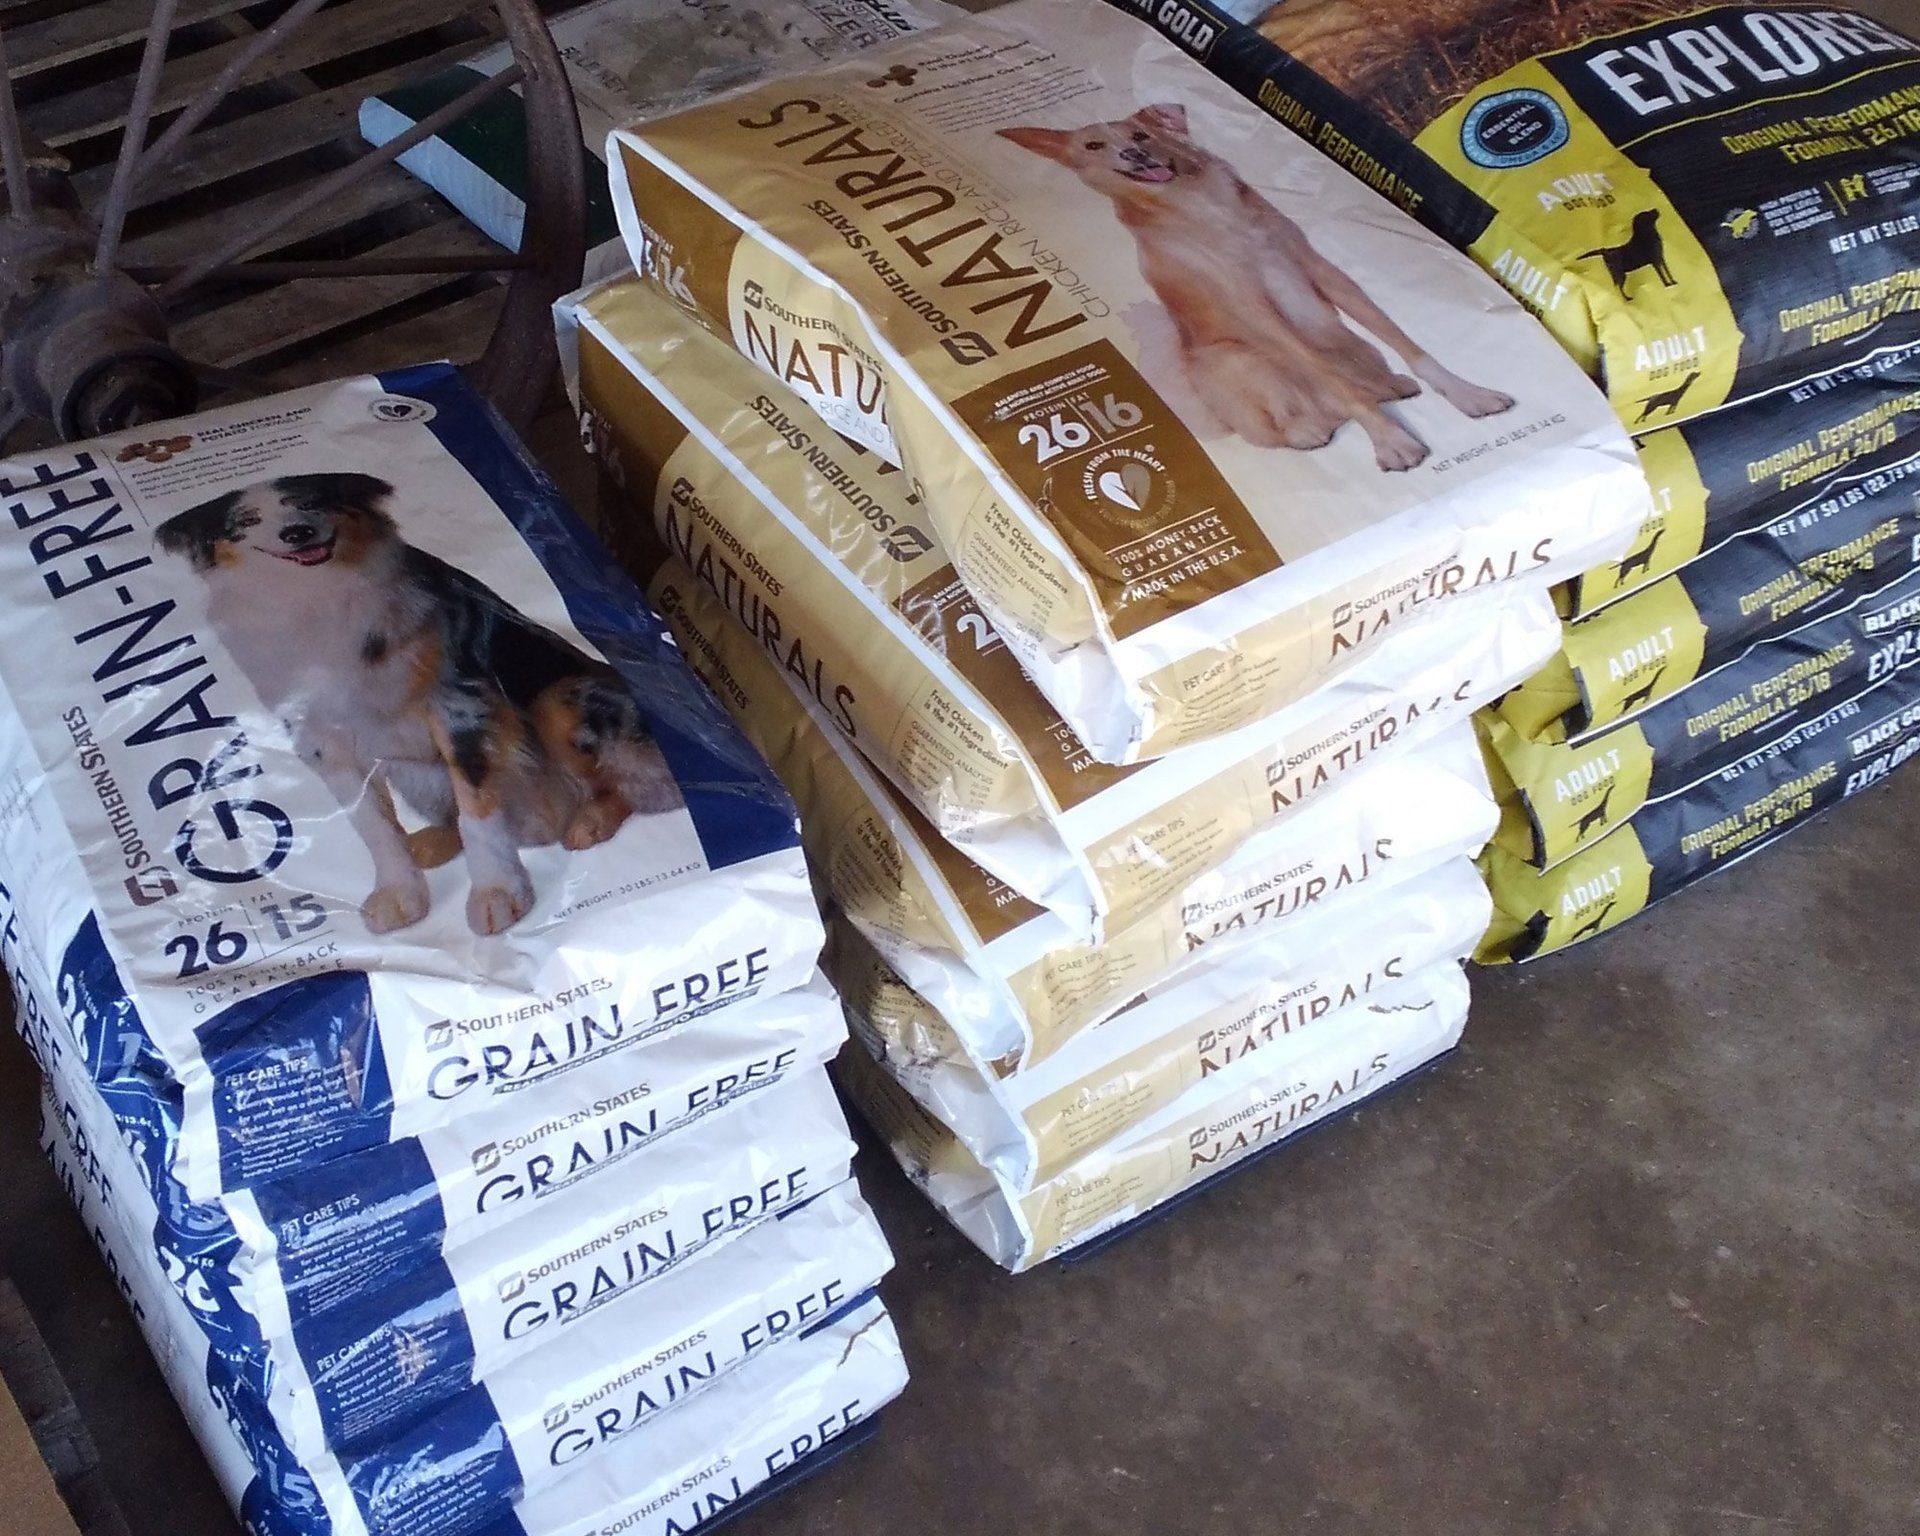 Quality Feeds for animals